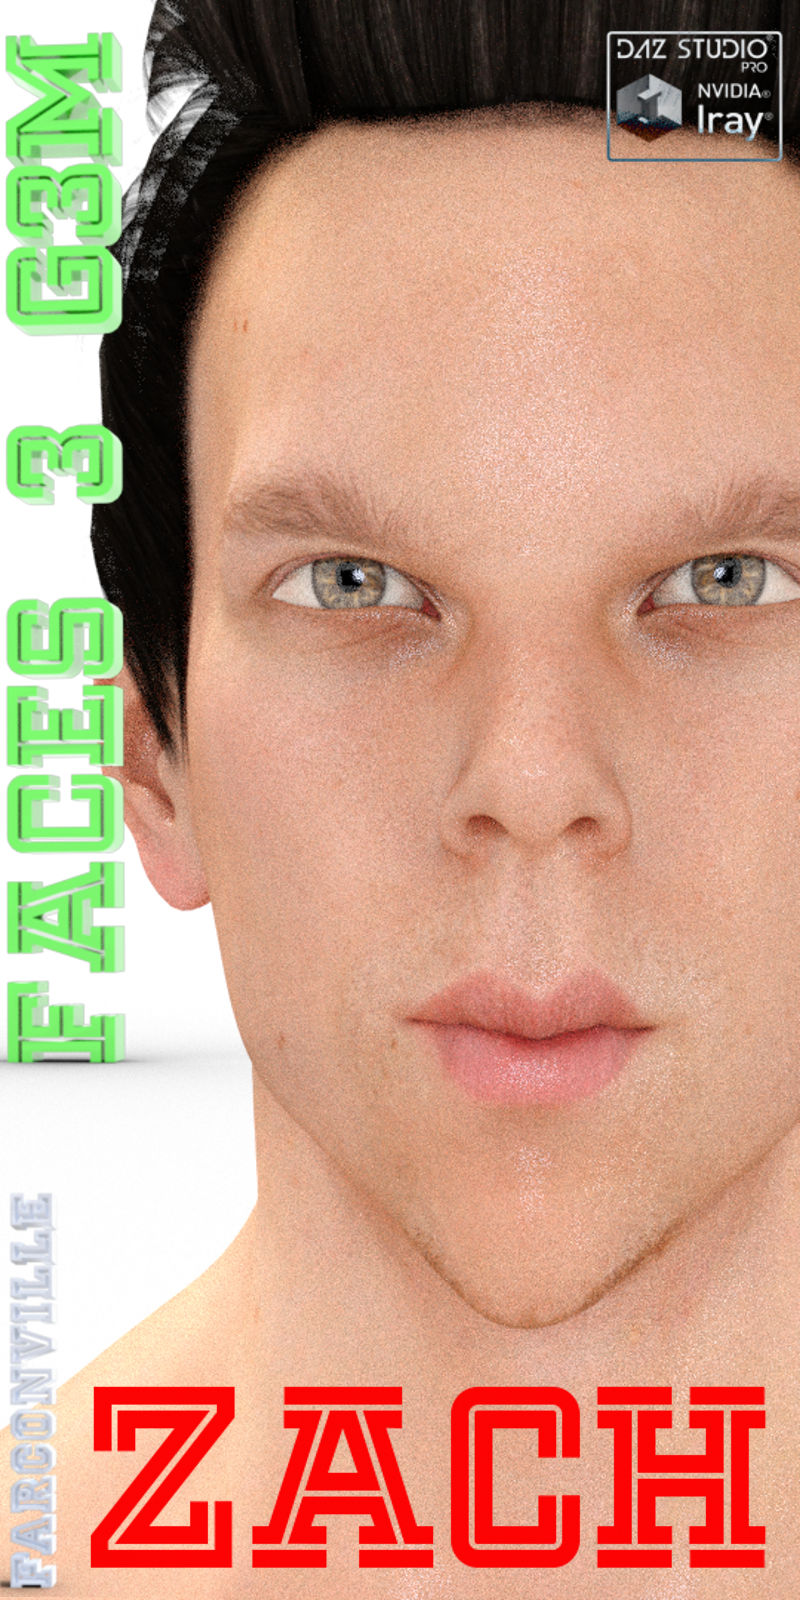 Faces 3 For Genesis 3 Males And Michael 7